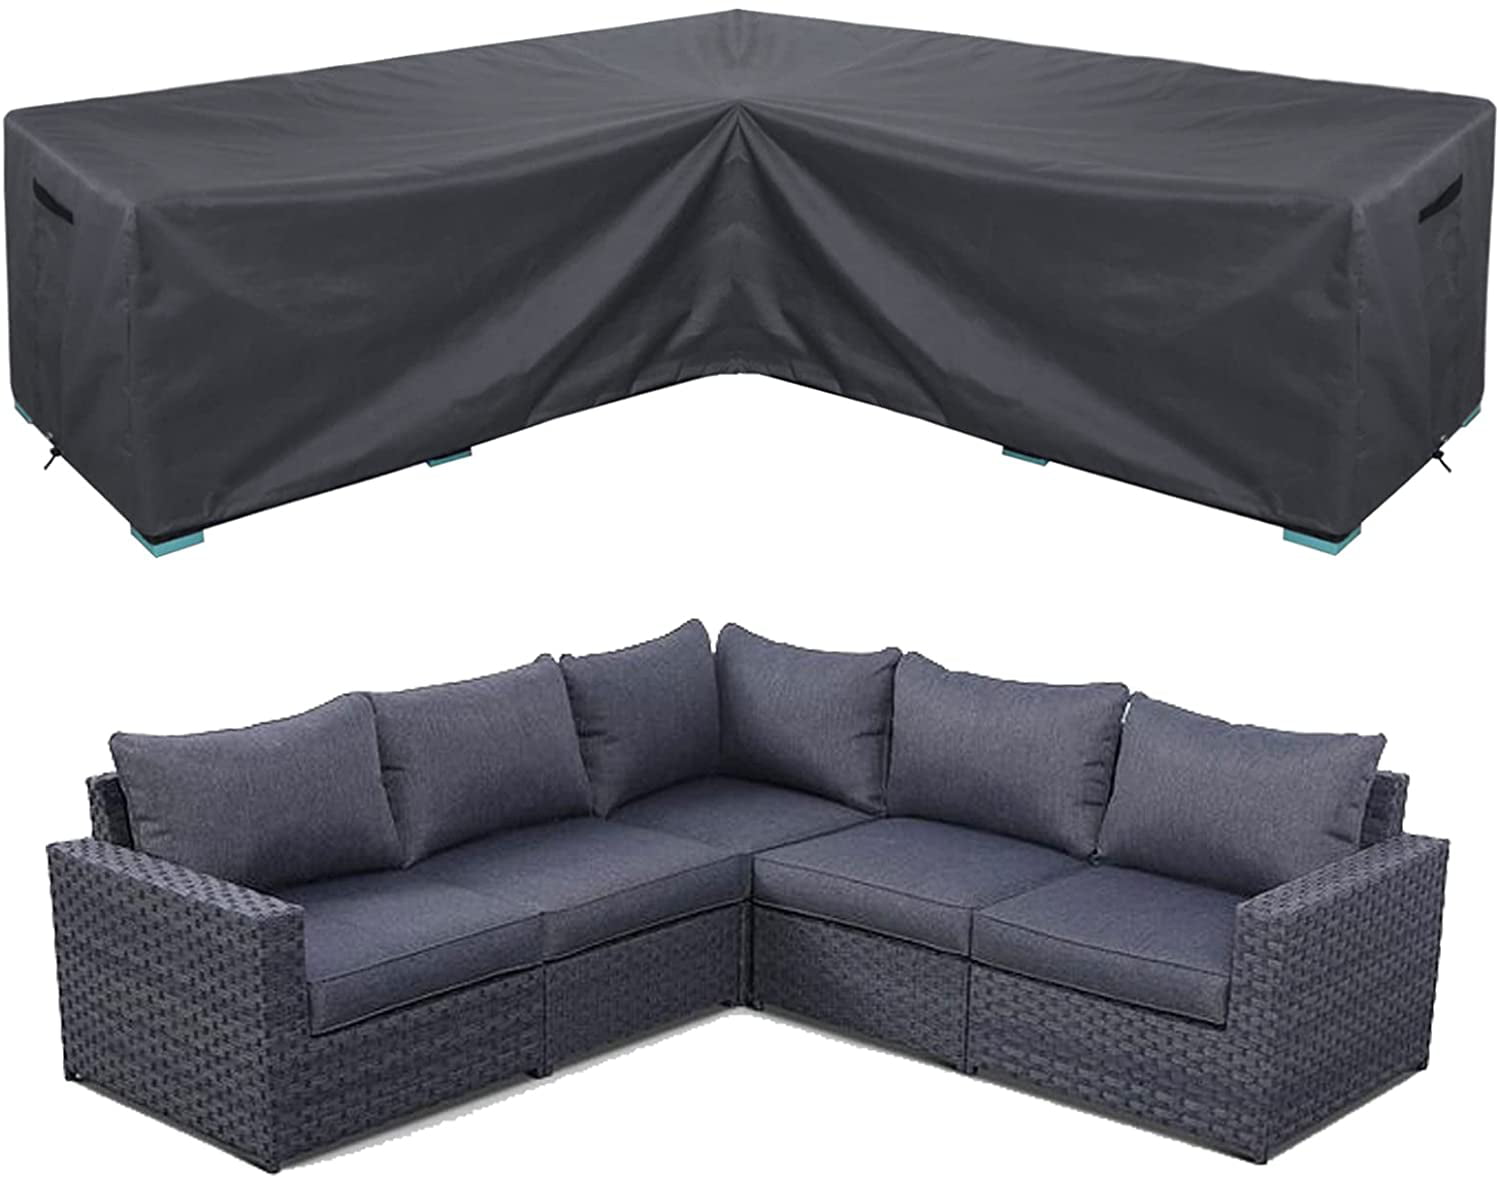 Details about   L Shape Furniture Cover Garden Patio Outdoor Couch Rainproof UV Proof Protective 